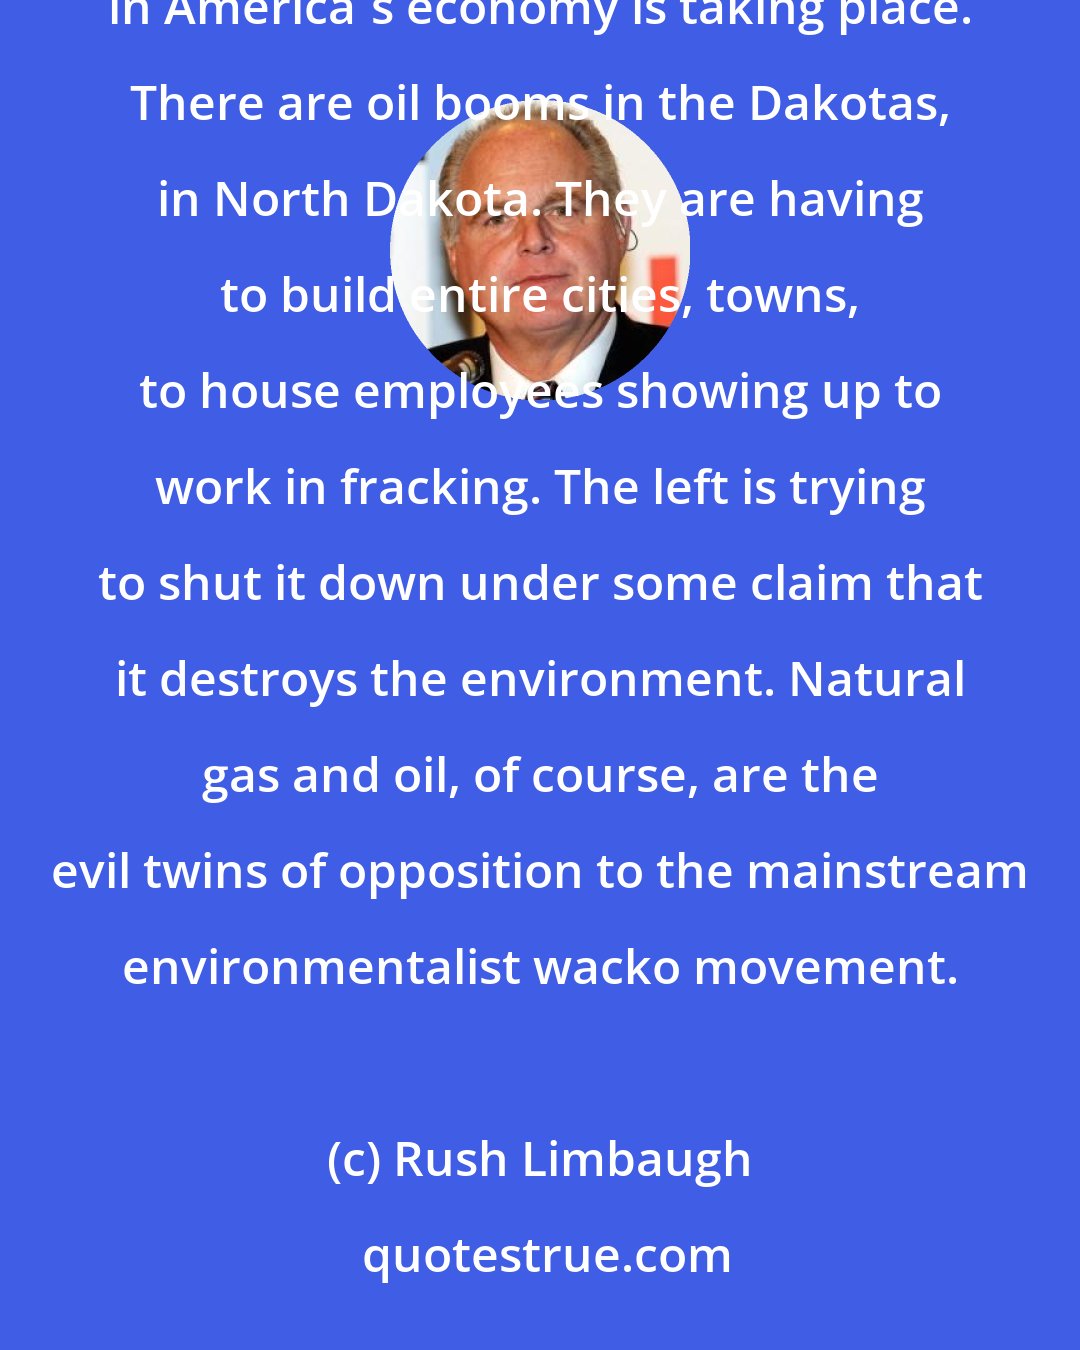 Rush Limbaugh: Other than areas of high-tech, fracking is probably one of the largest areas where concentrated growth in America's economy is taking place. There are oil booms in the Dakotas, in North Dakota. They are having to build entire cities, towns, to house employees showing up to work in fracking. The left is trying to shut it down under some claim that it destroys the environment. Natural gas and oil, of course, are the evil twins of opposition to the mainstream environmentalist wacko movement.